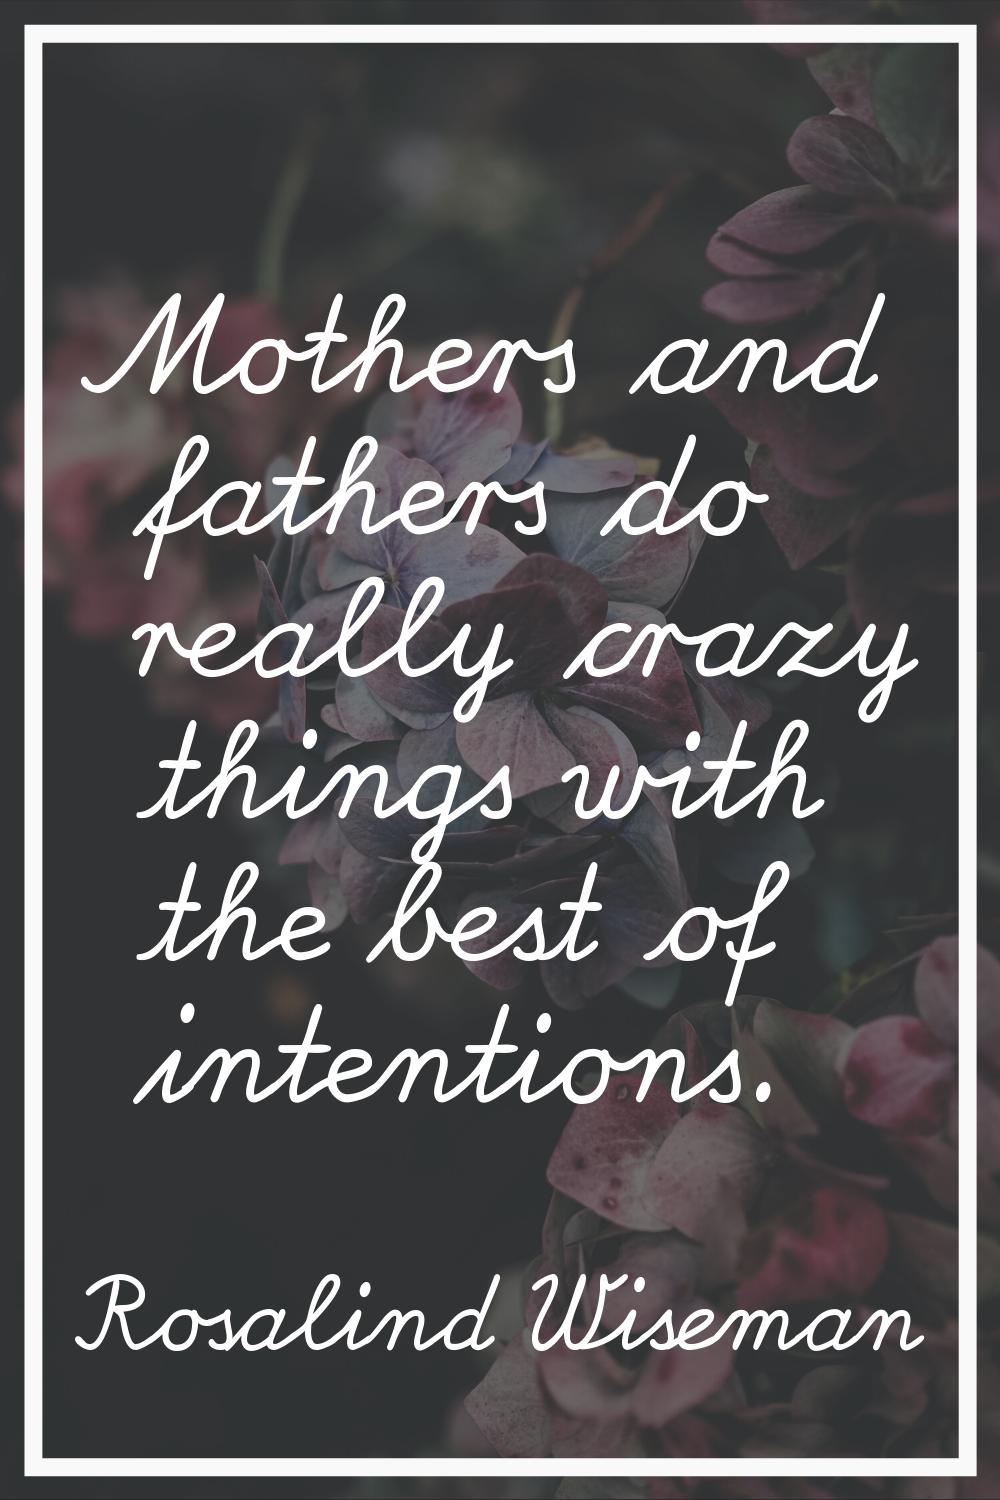 Mothers and fathers do really crazy things with the best of intentions.